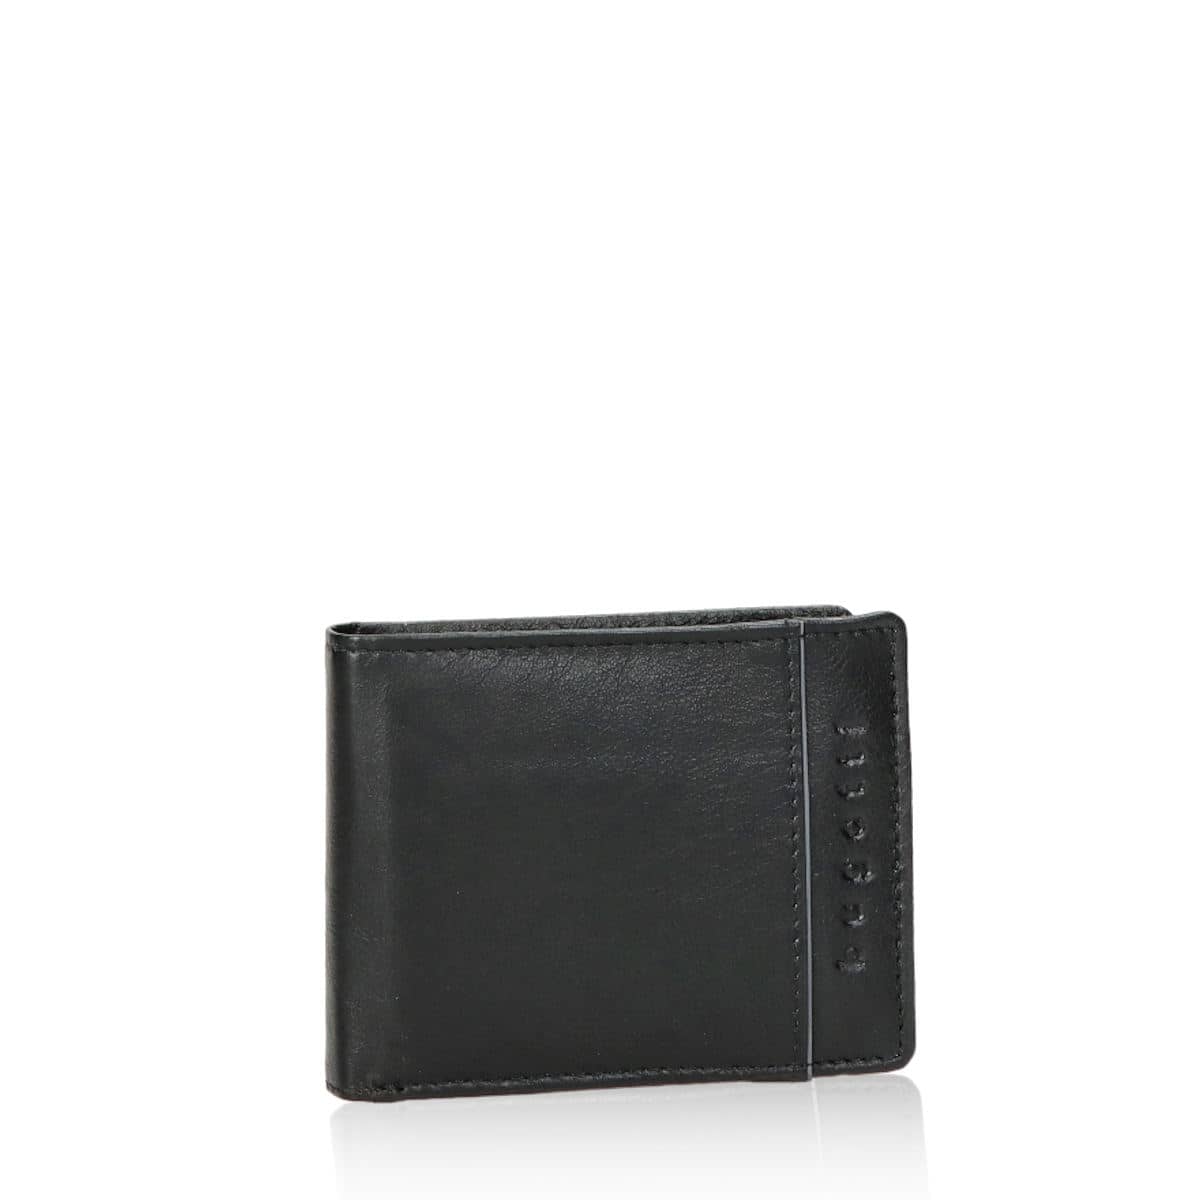 Guess Men's Leather Credit Card RFID Billfold Wallet With